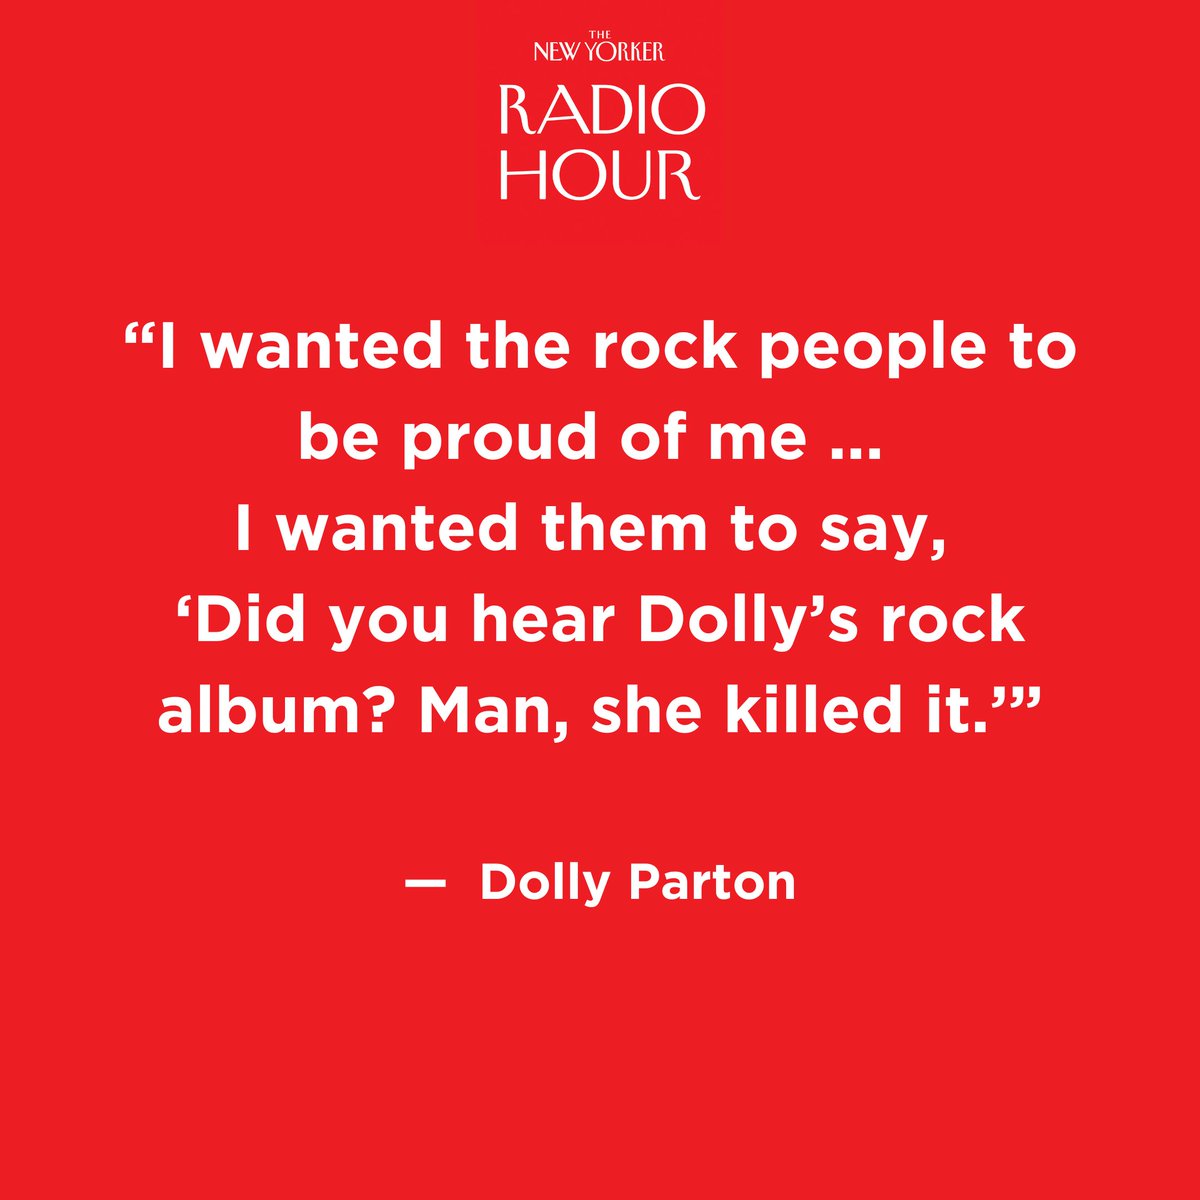 For fans of our Dolly Parton's America miniseries, our friends at the #NewYorkerRadio Hour podcast talk to @DollyParton about her new album “Rockstar,” the country music icon's first foray into rock music. Listen here: bit.ly/3uHfhOq